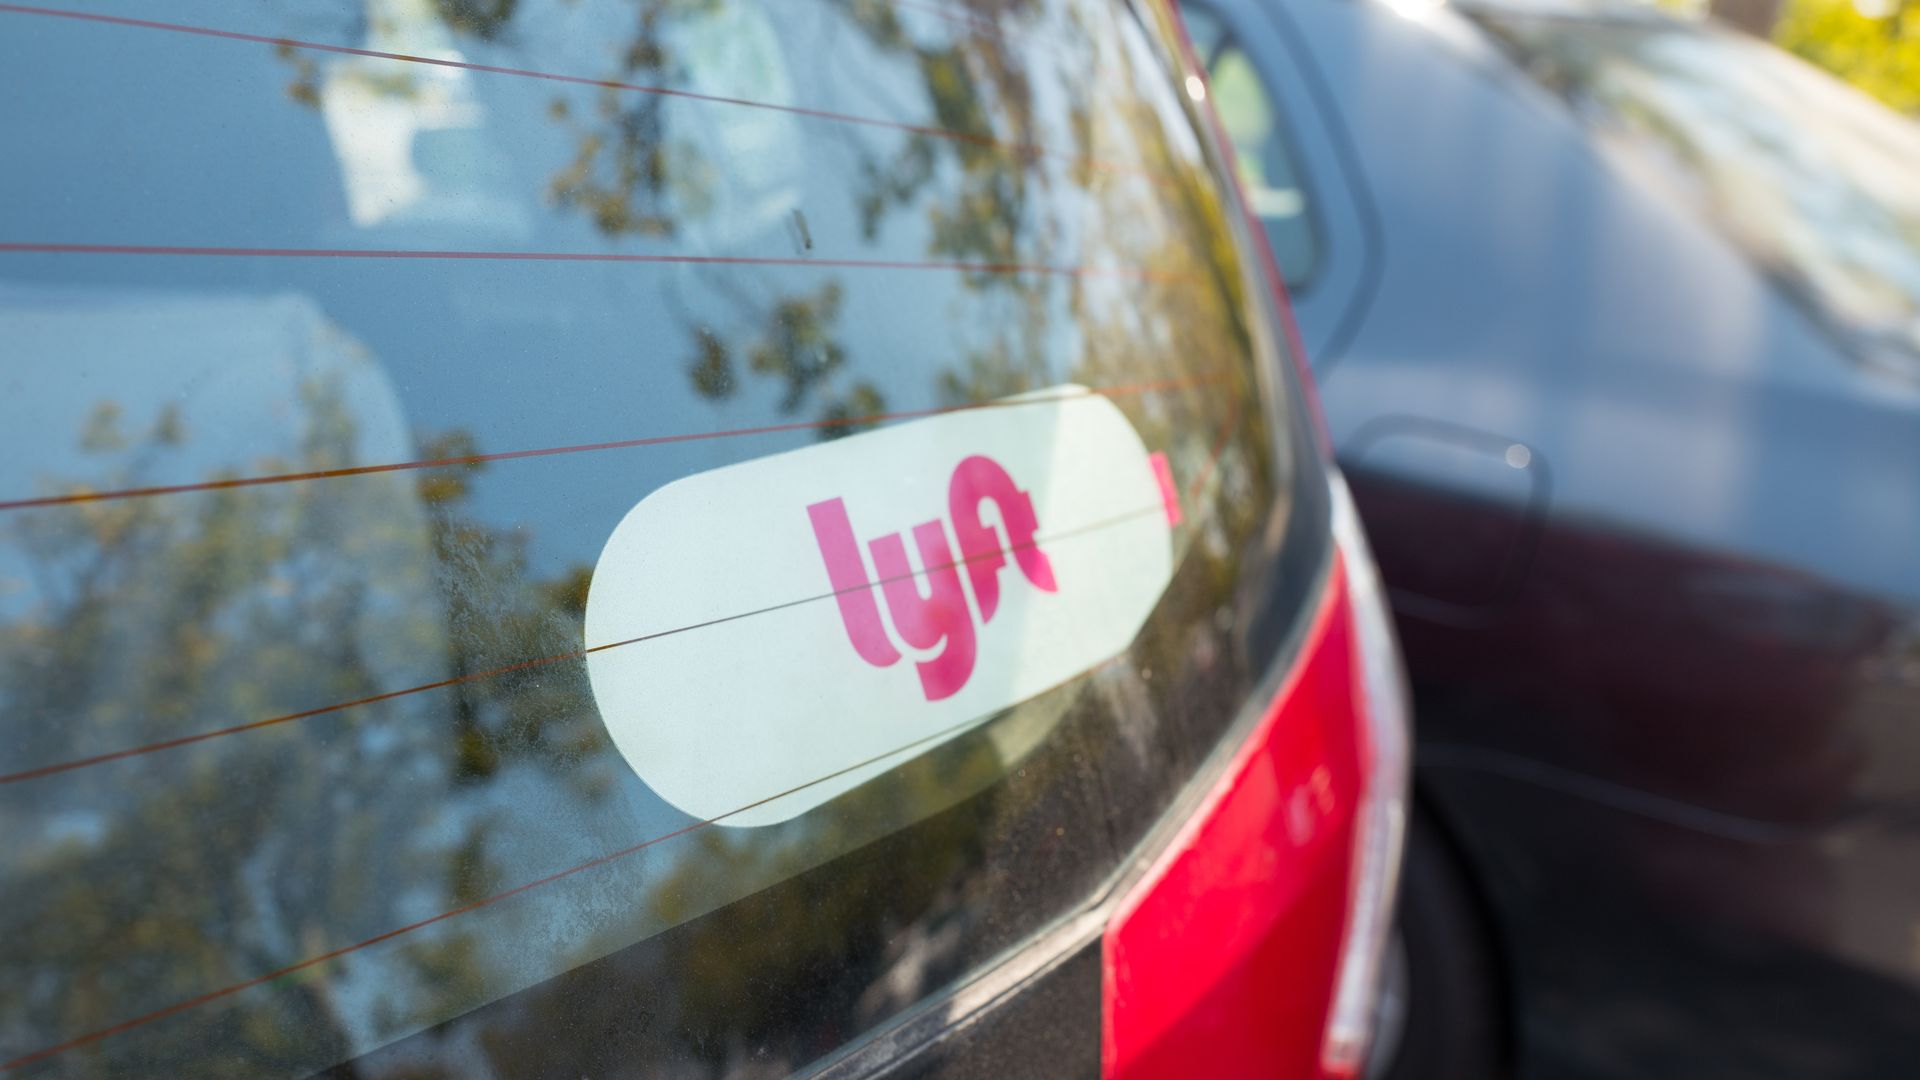 A photo of a sticker reading "Lyft" on the back window of a car.